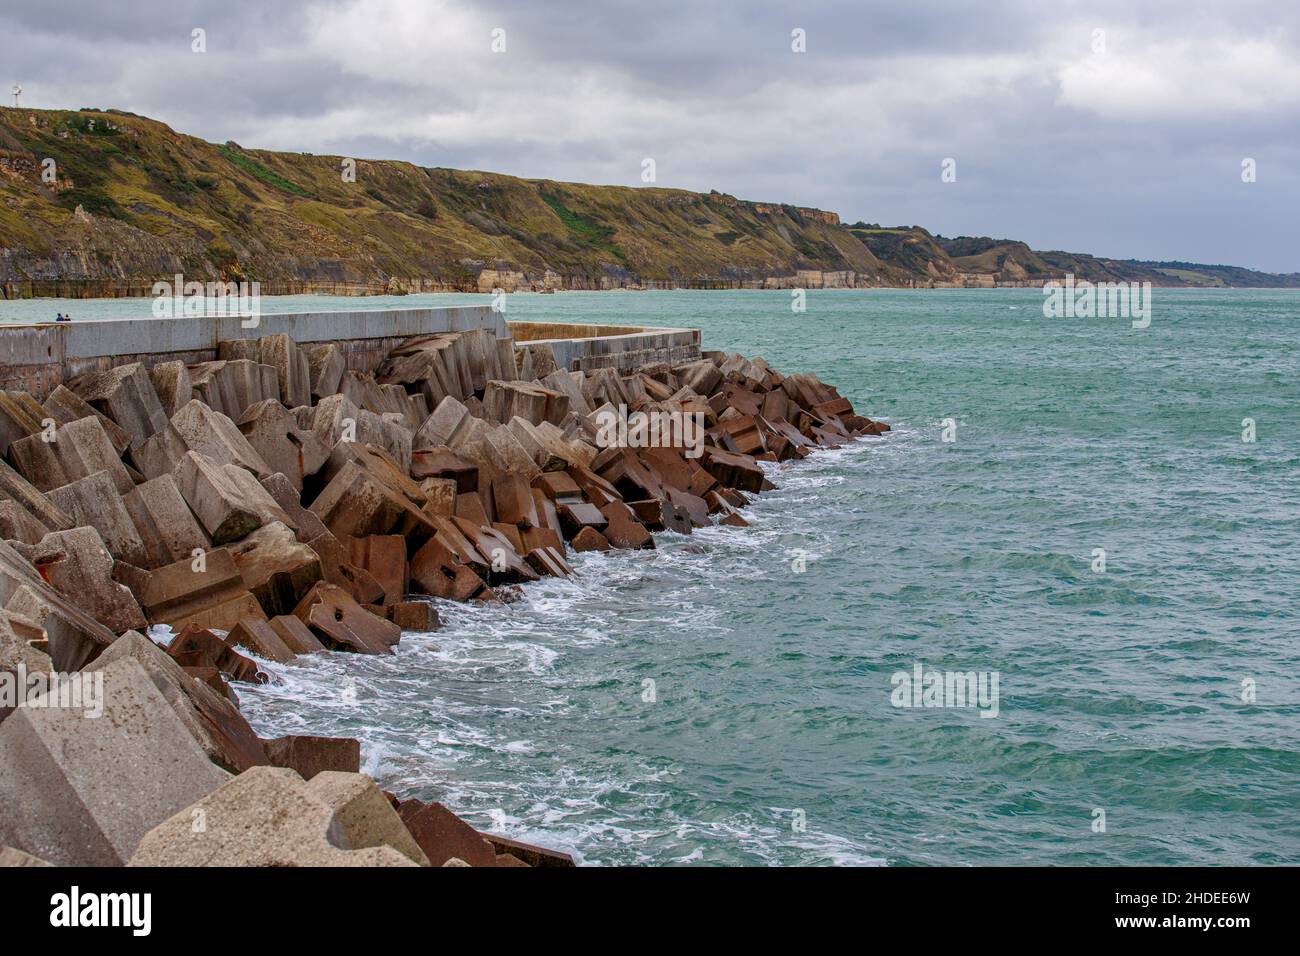 Views of Port en Bessin in Normandy France Stock Photo